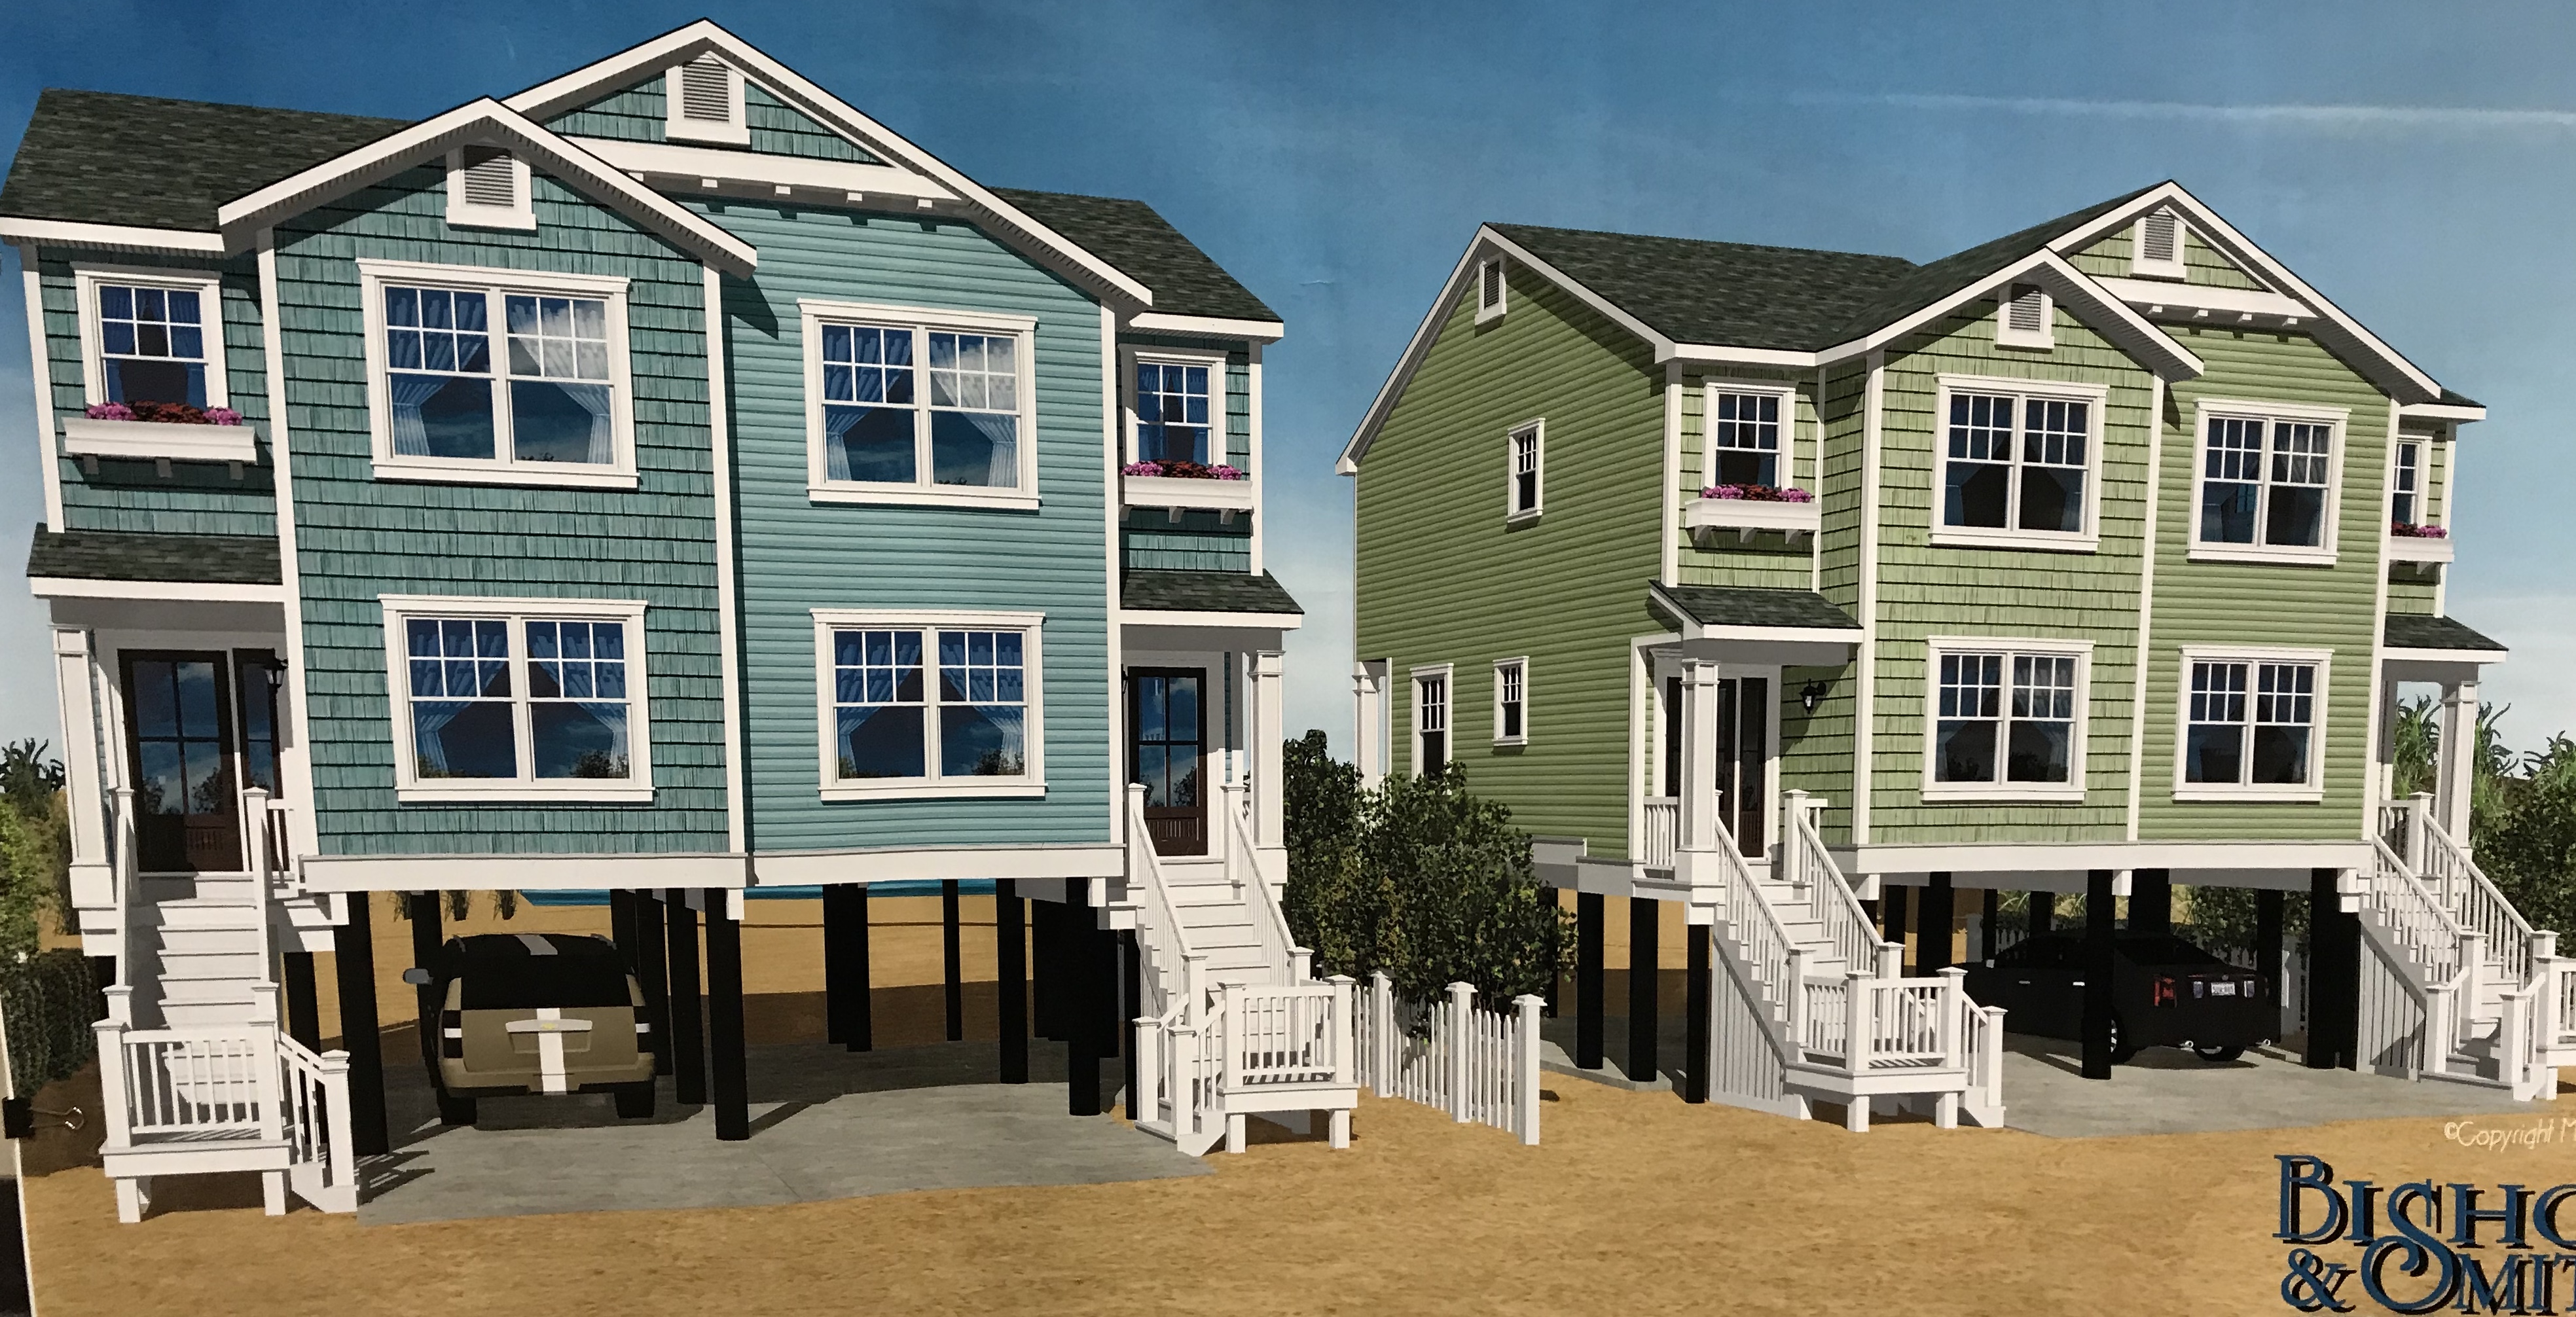 A rendering of proposed homes for the rebuilt Camp Osborn neighborhood. (Photo: Daniel Nee)